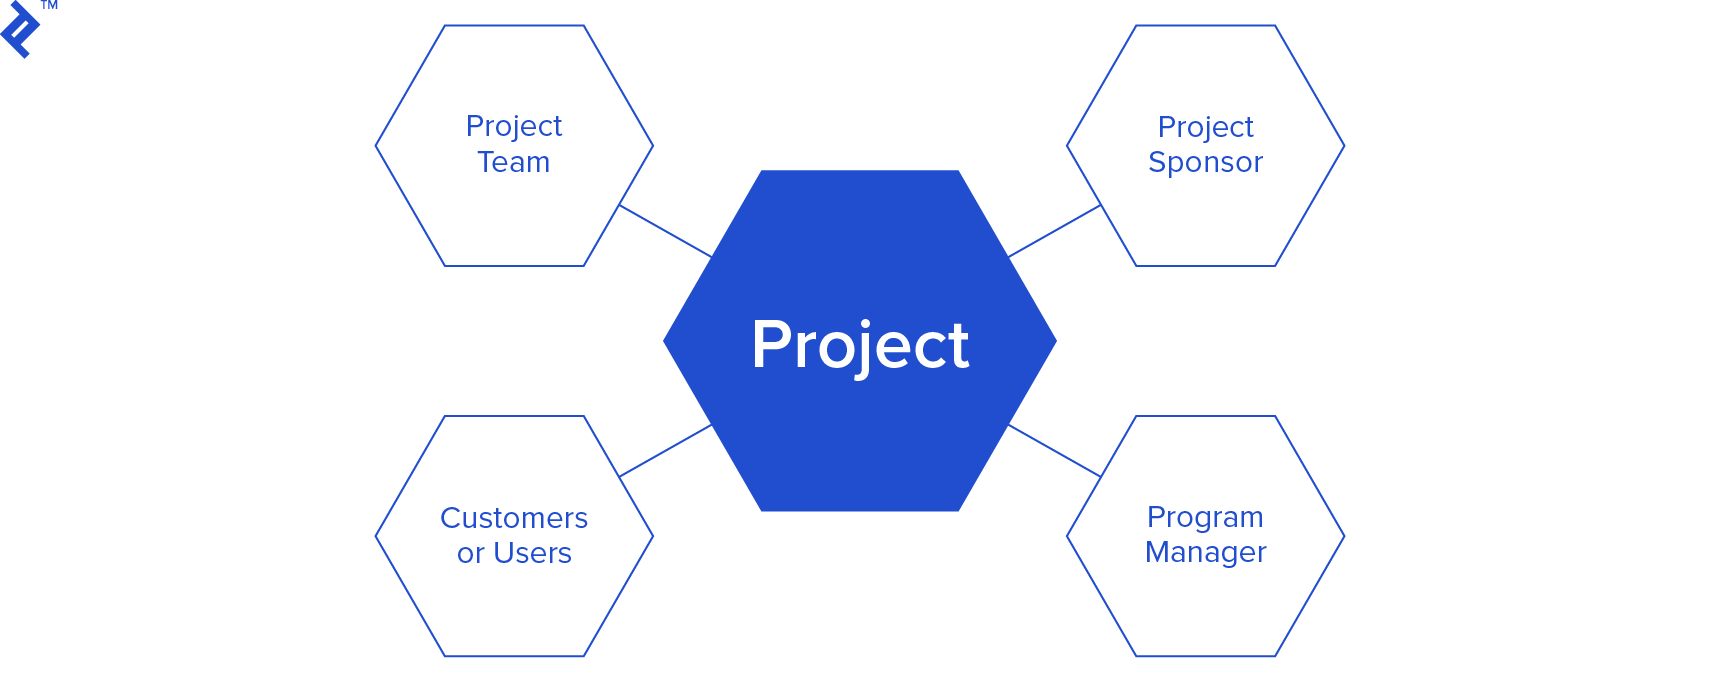 Key stakeholders during the initial phase of project takeover